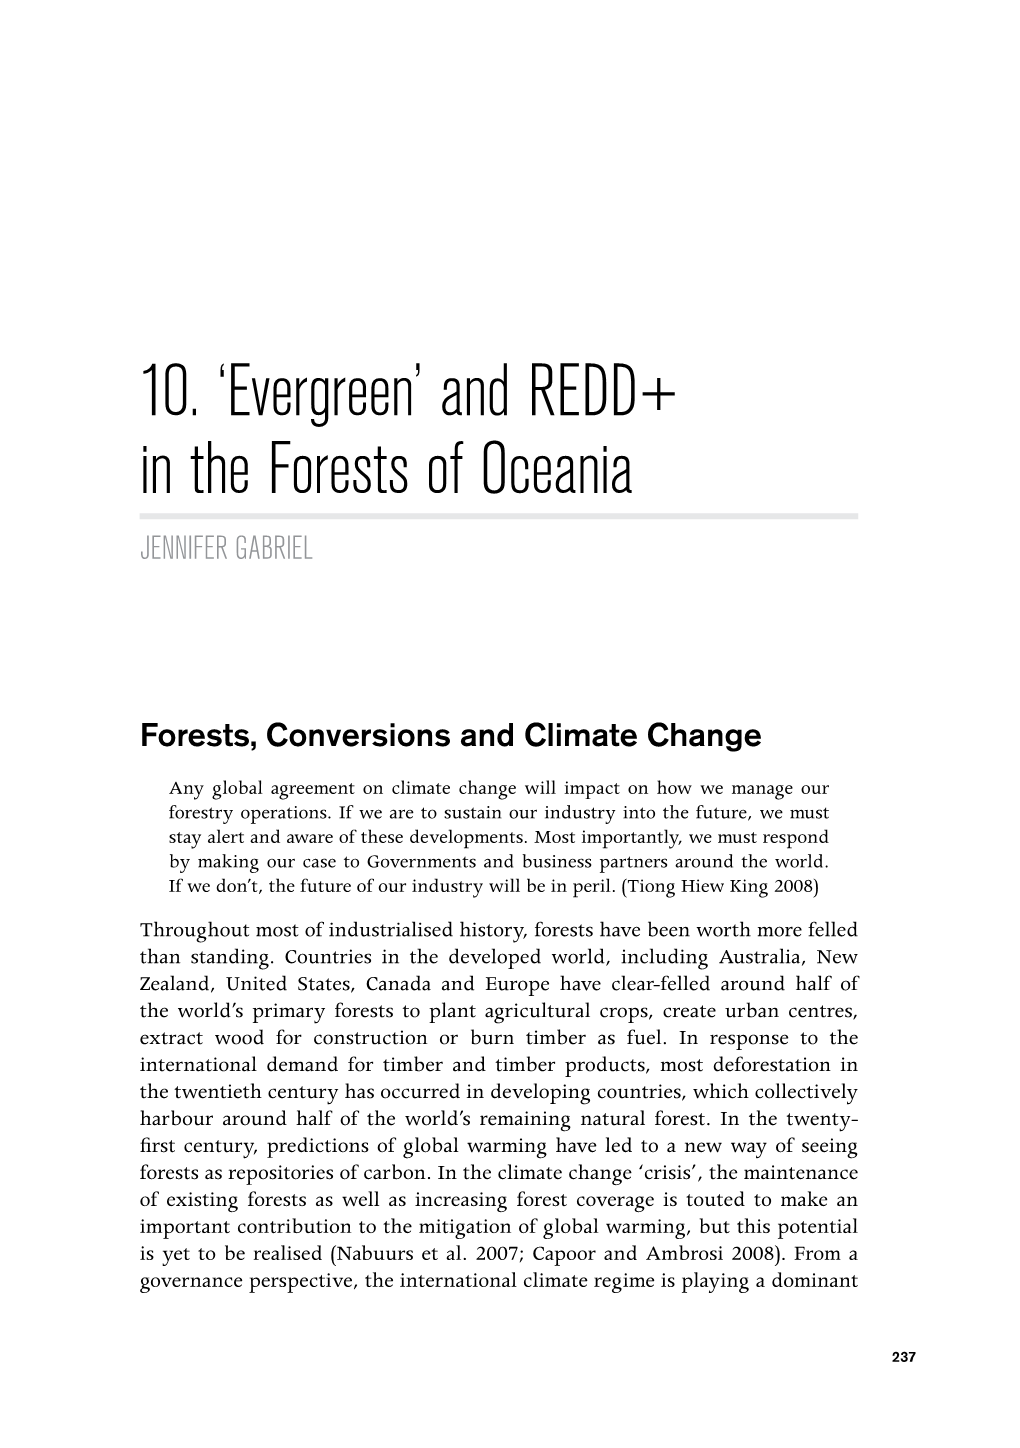 'Evergreen' and REDD+ in the Forests of Oceania